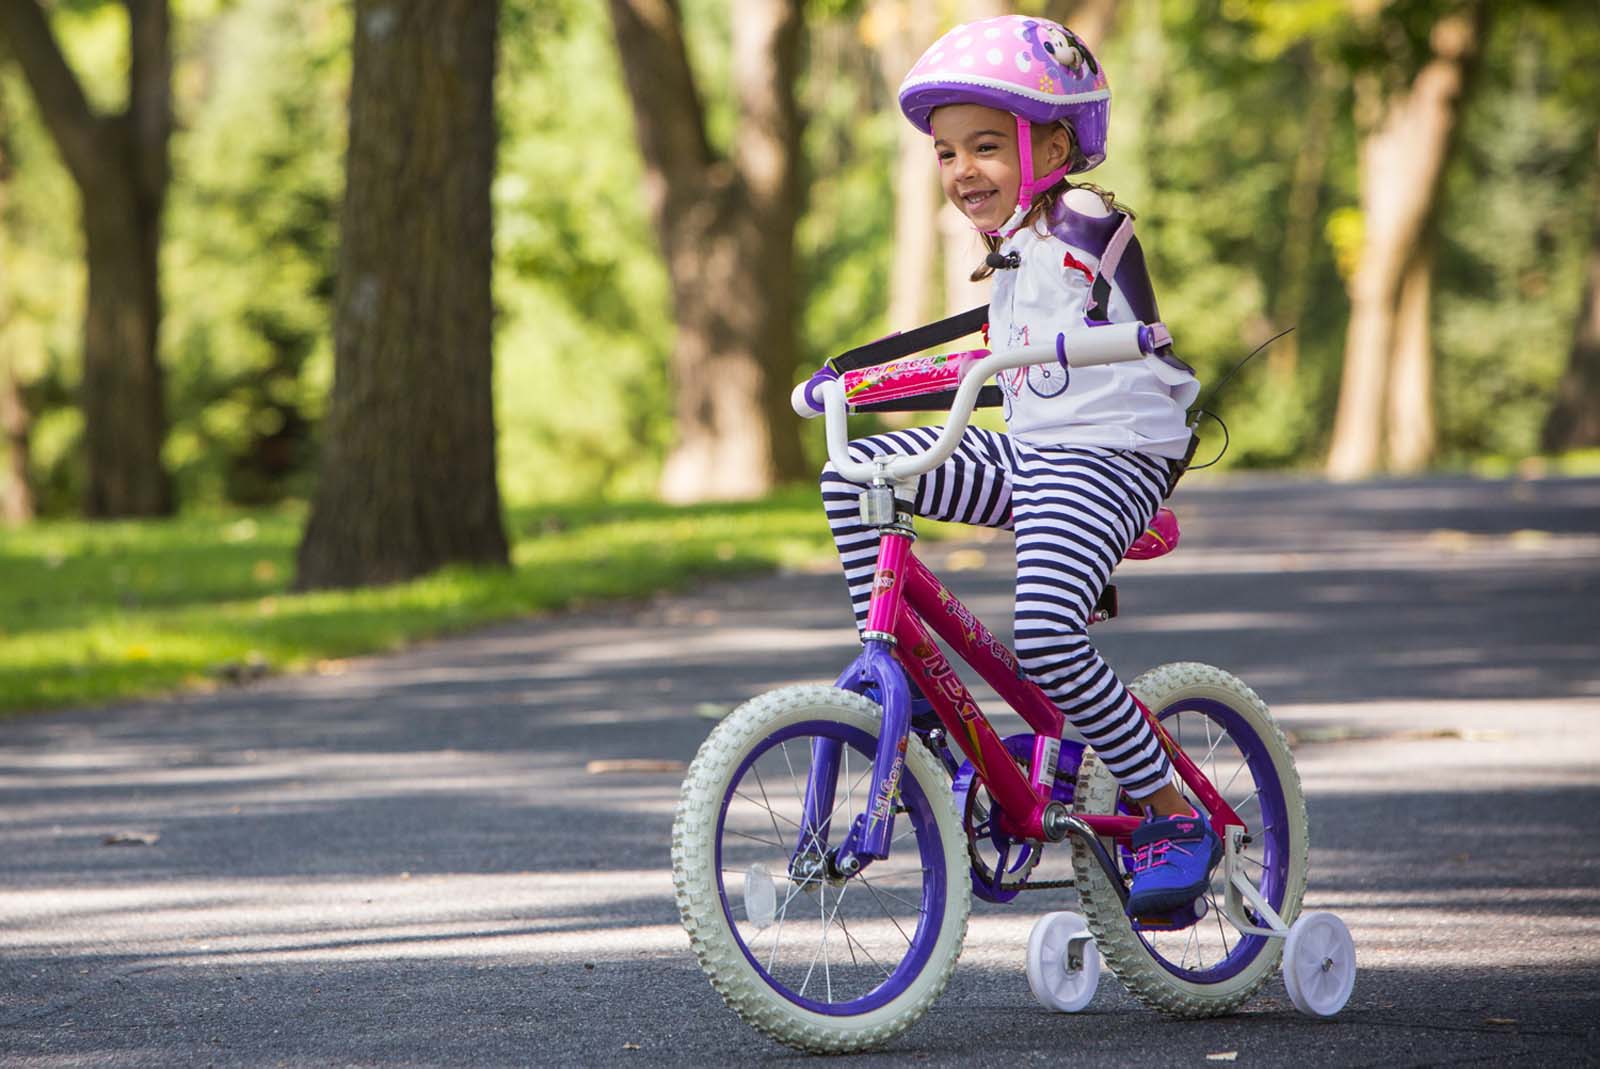 Gillette patient Ruth Evelyn (RE) who was born without arms rides her bike